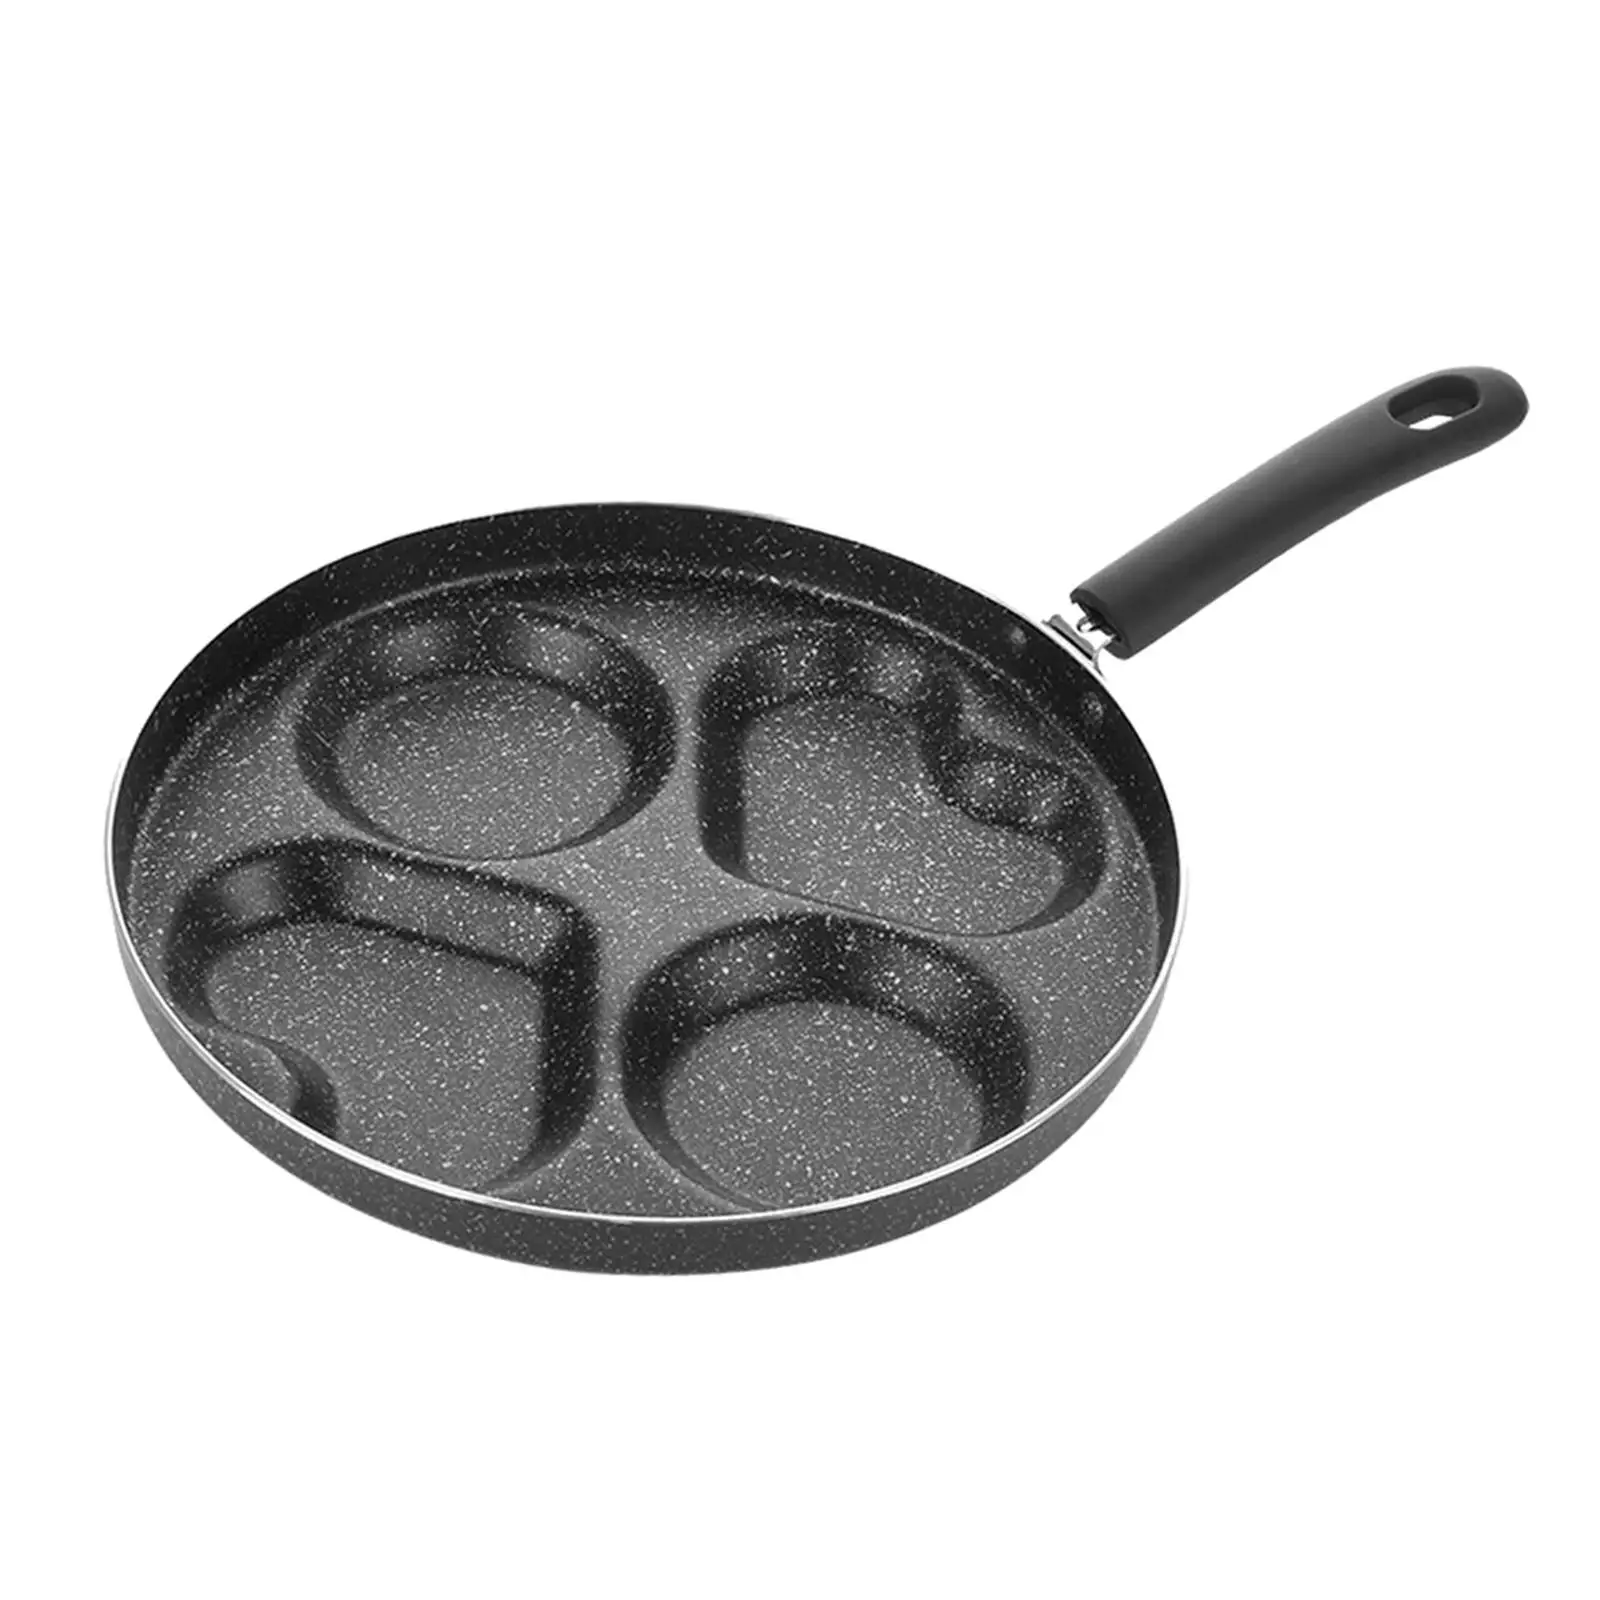 4 Cup Egg Frying Pan 2 Heart Shape and 2 Round Shape Pancake Maker for Hotel